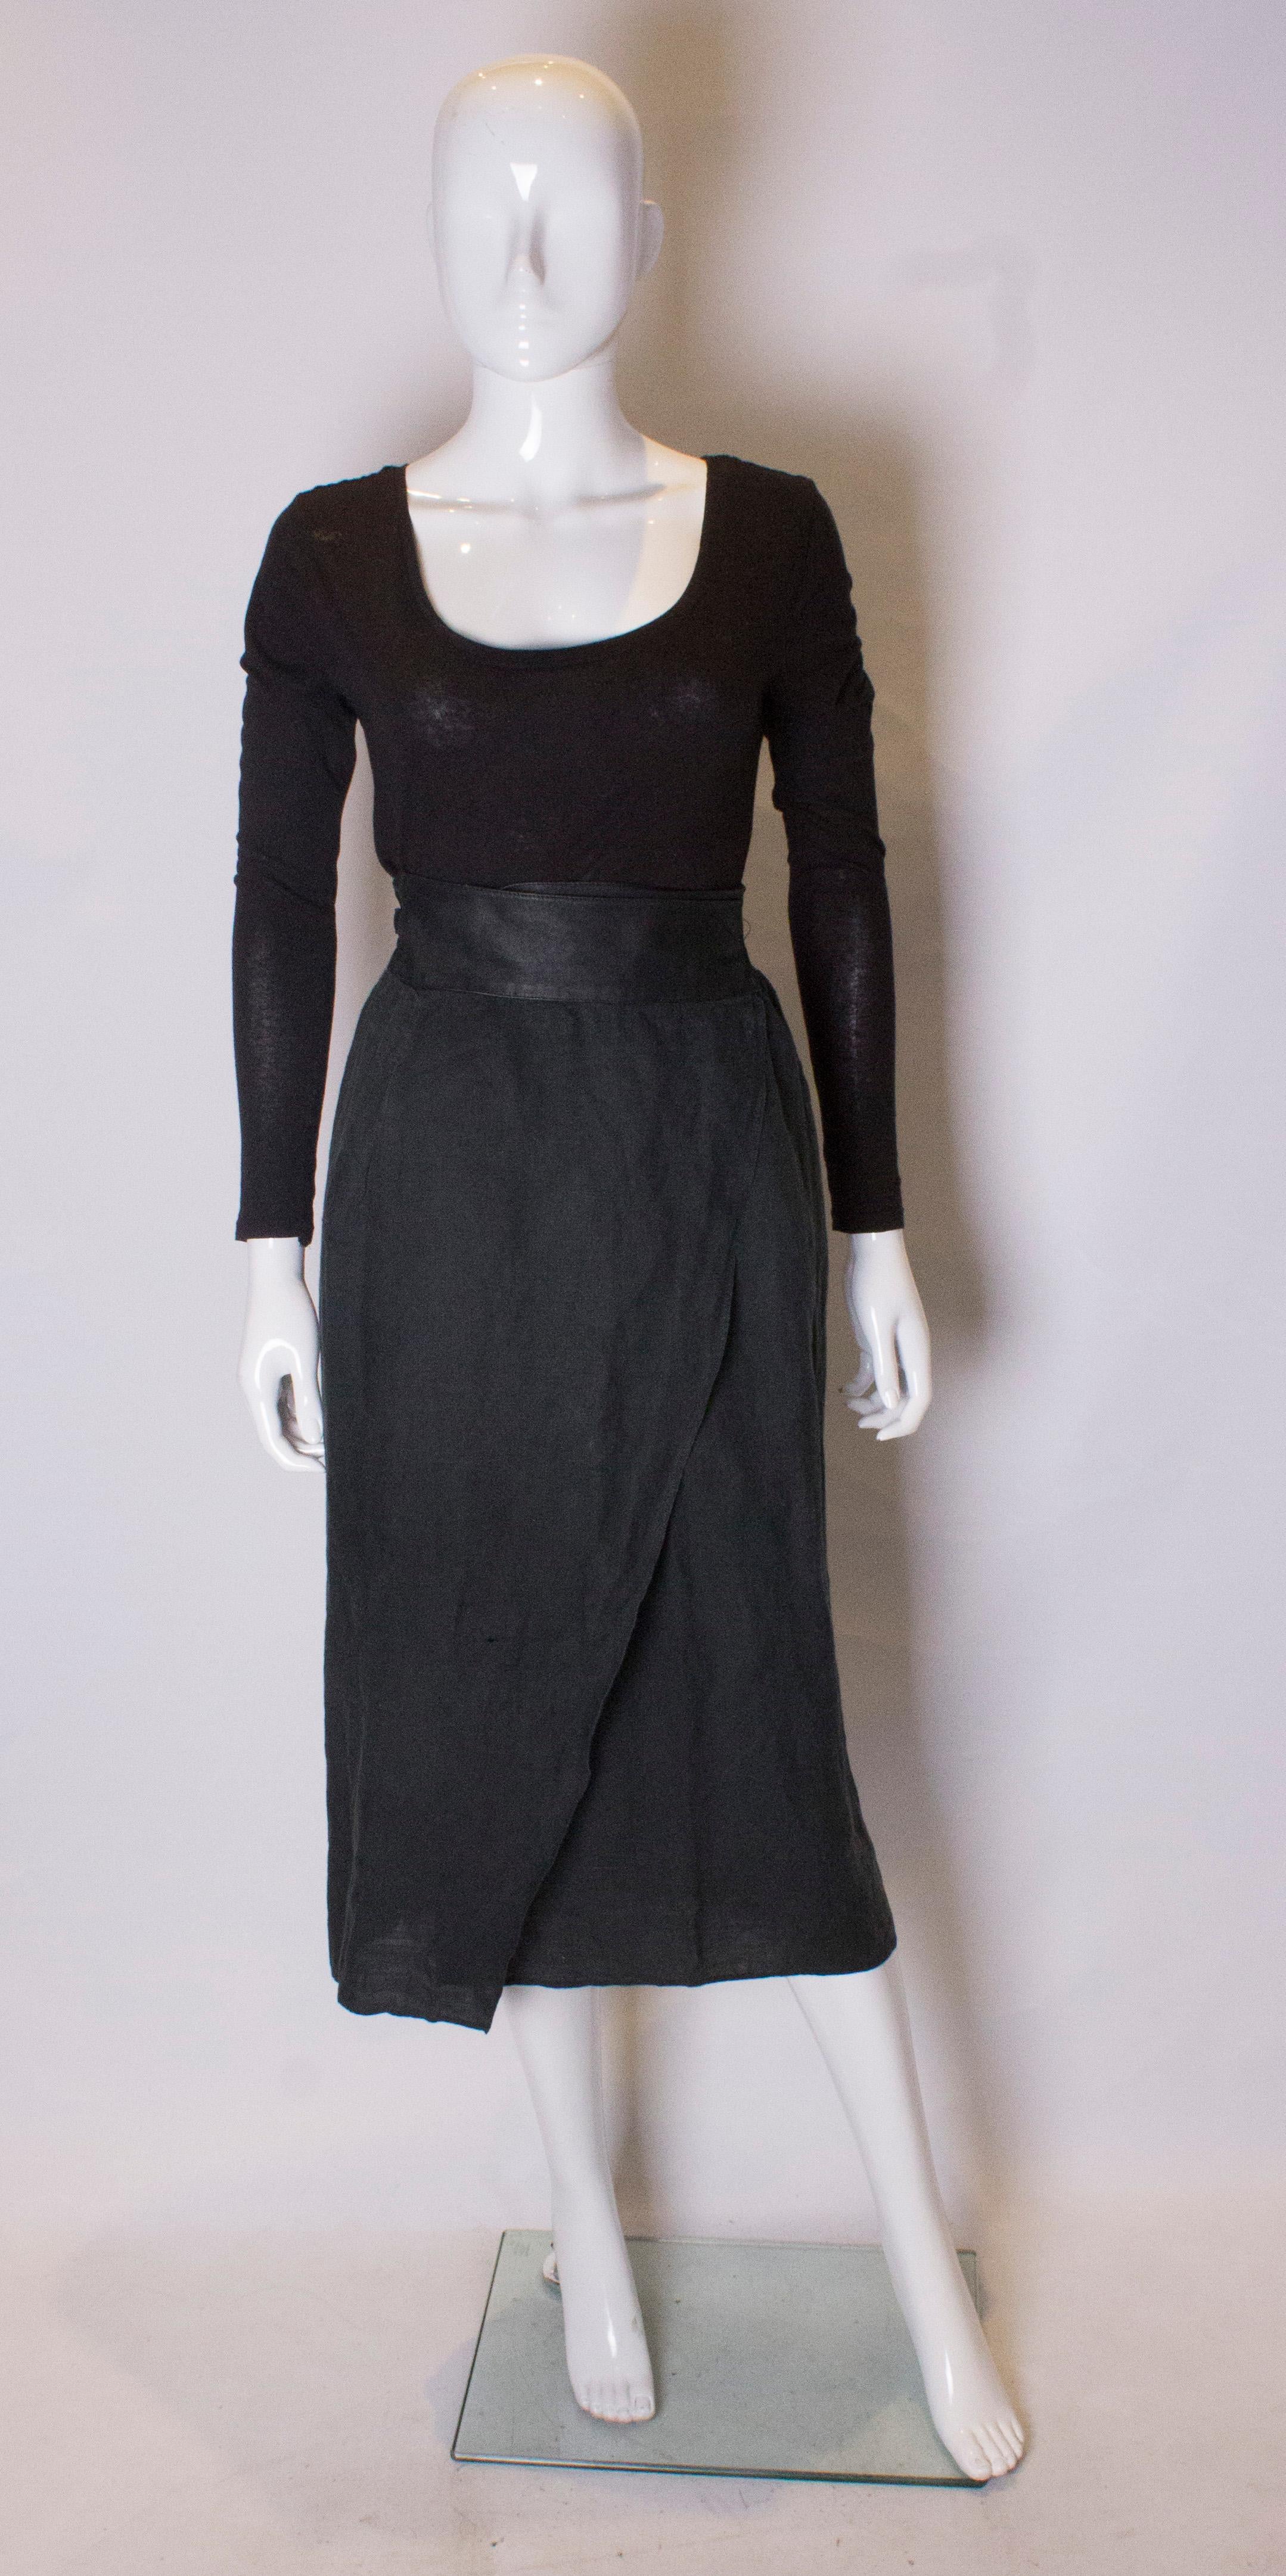 A chic vintage wrap around skirt by Versace mainline. The skirt has a leather waistband and tie, and skirt part is linen.